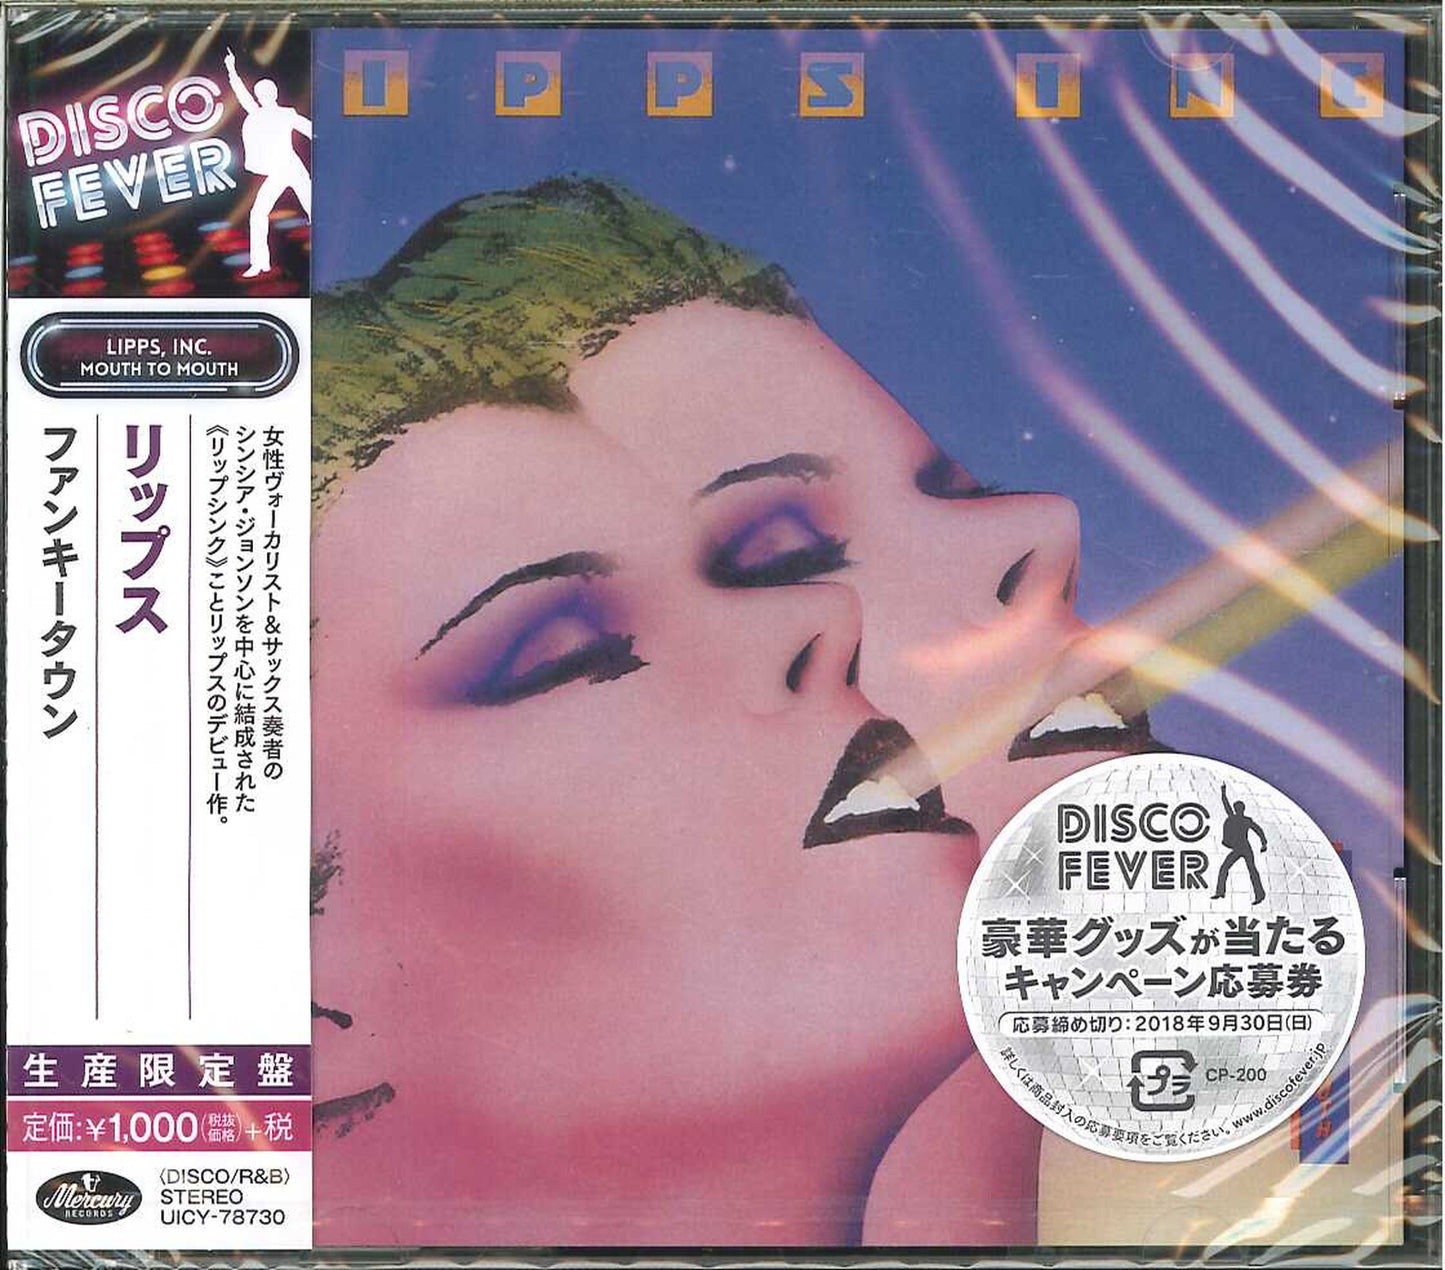 Lipps. Inc. - Mouth To Mouth - Japan  CD Limited Edition